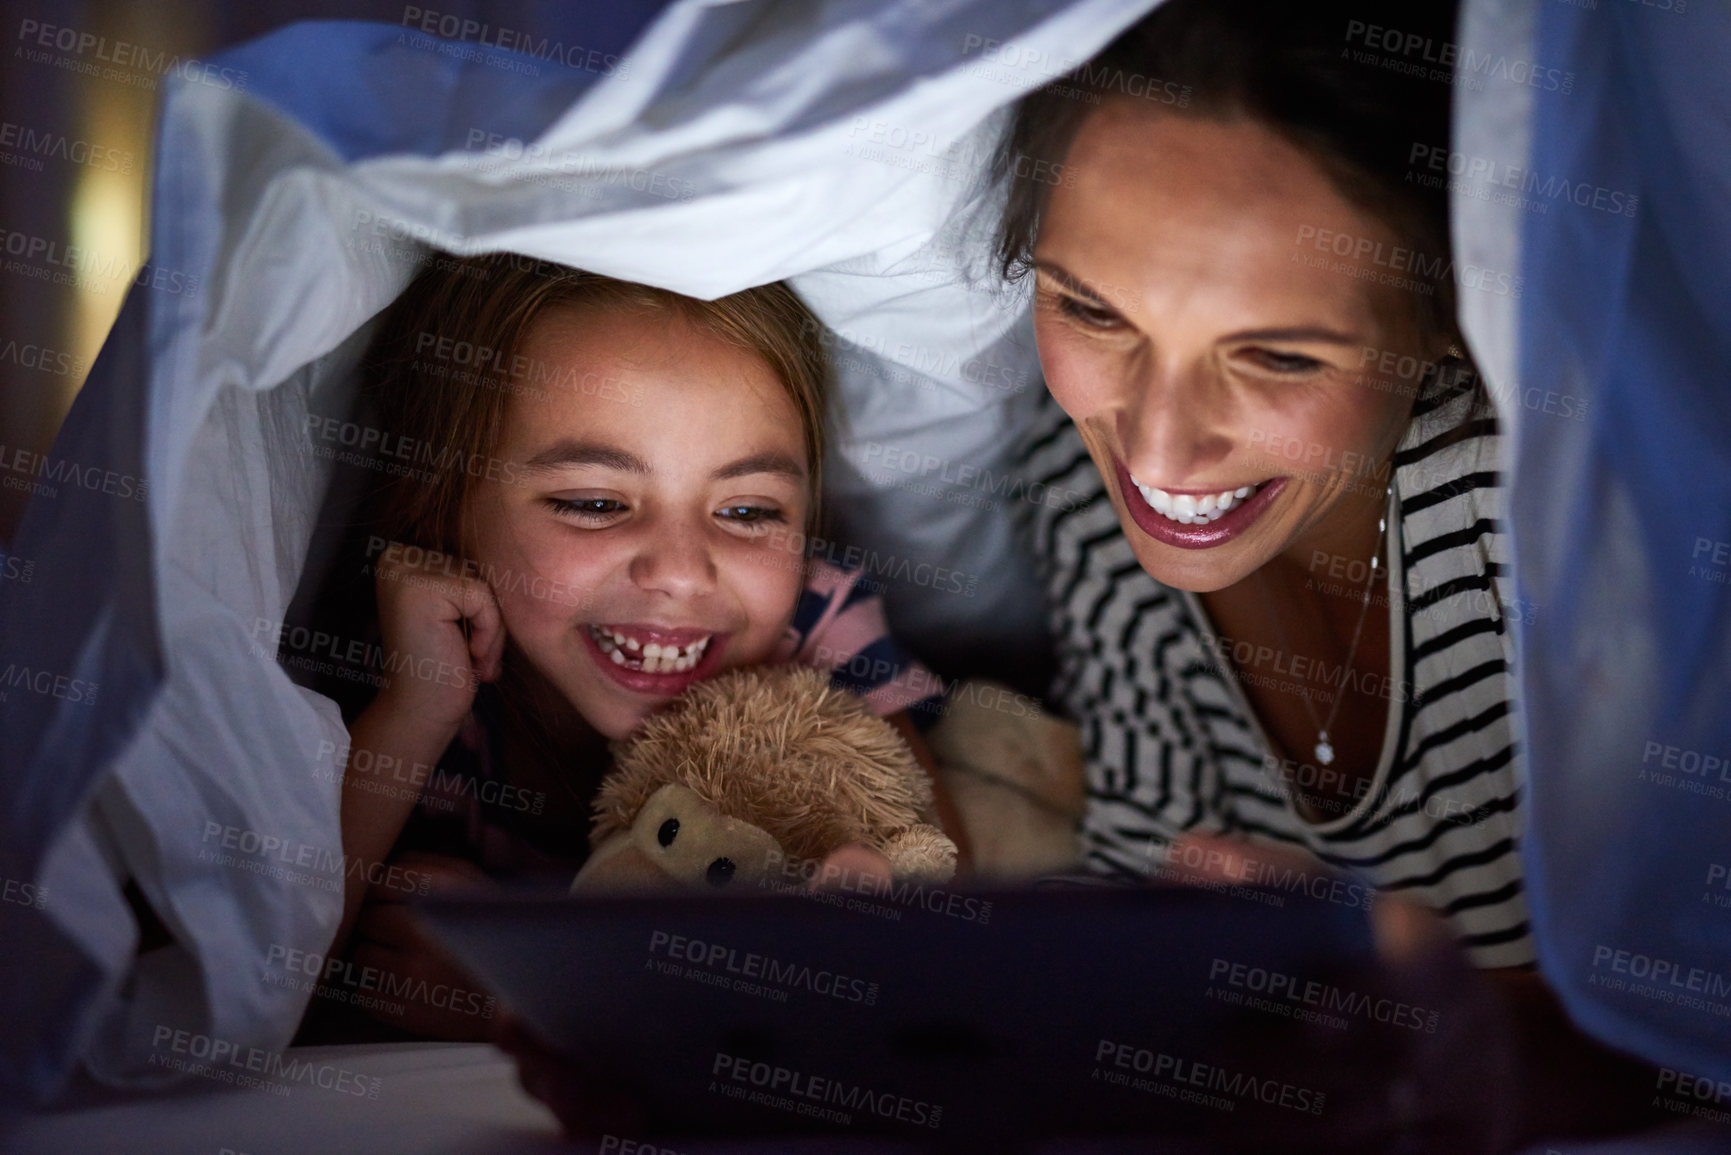 Buy stock photo Cropped shot of an attractive young woman reading her daughter a bedtime story